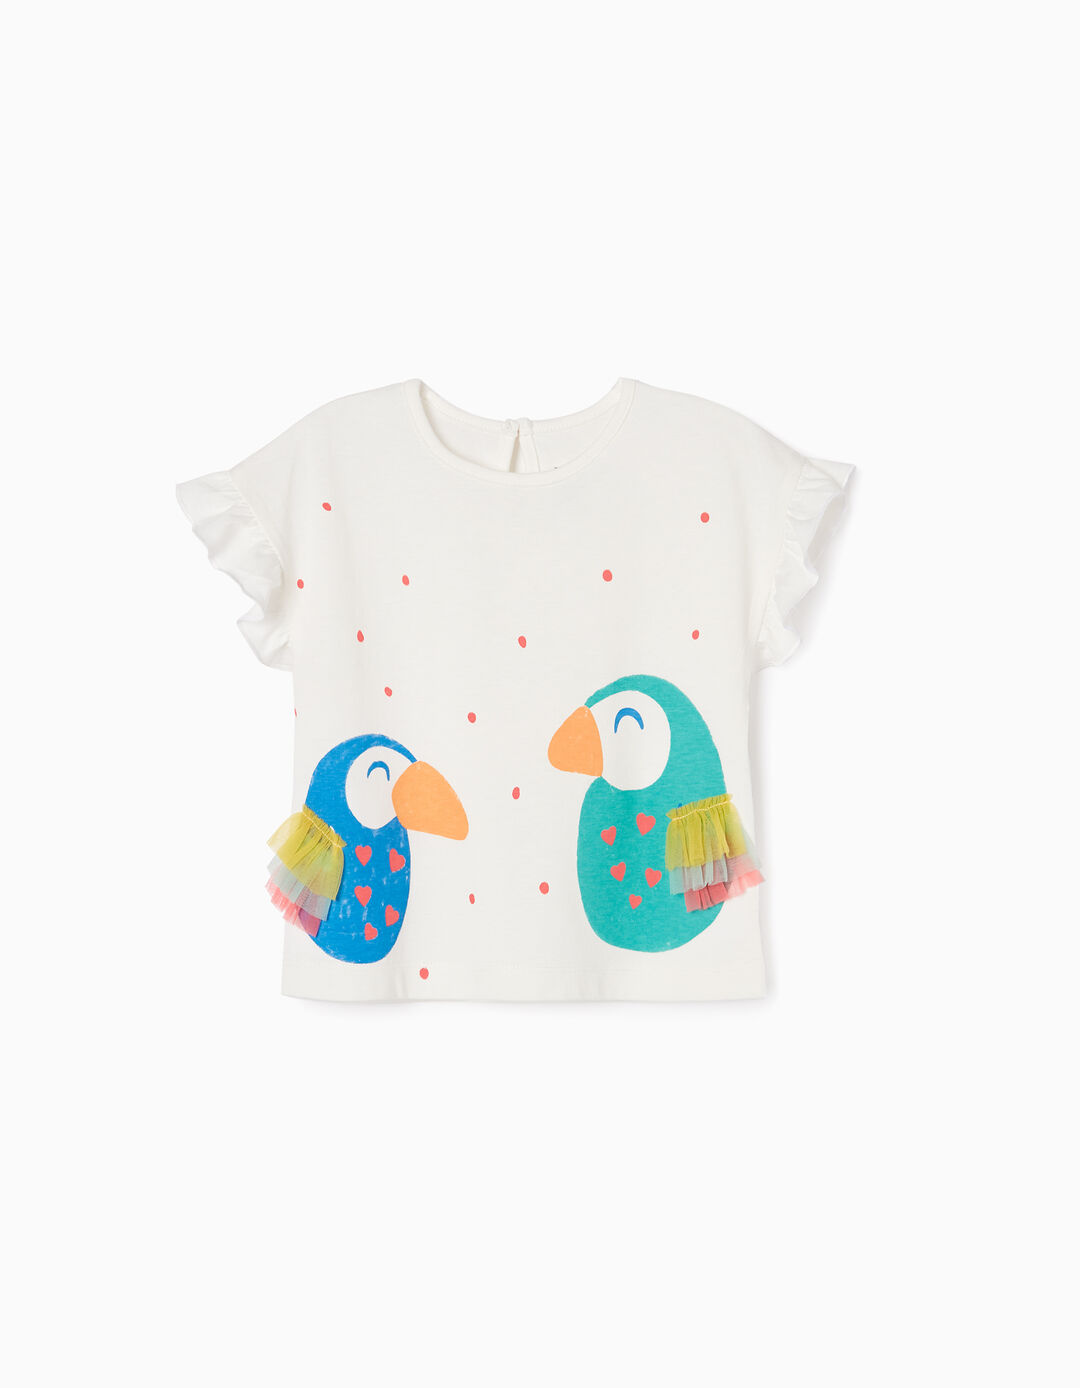 Cotton T-shirt for Girls 'Parrot', Coral